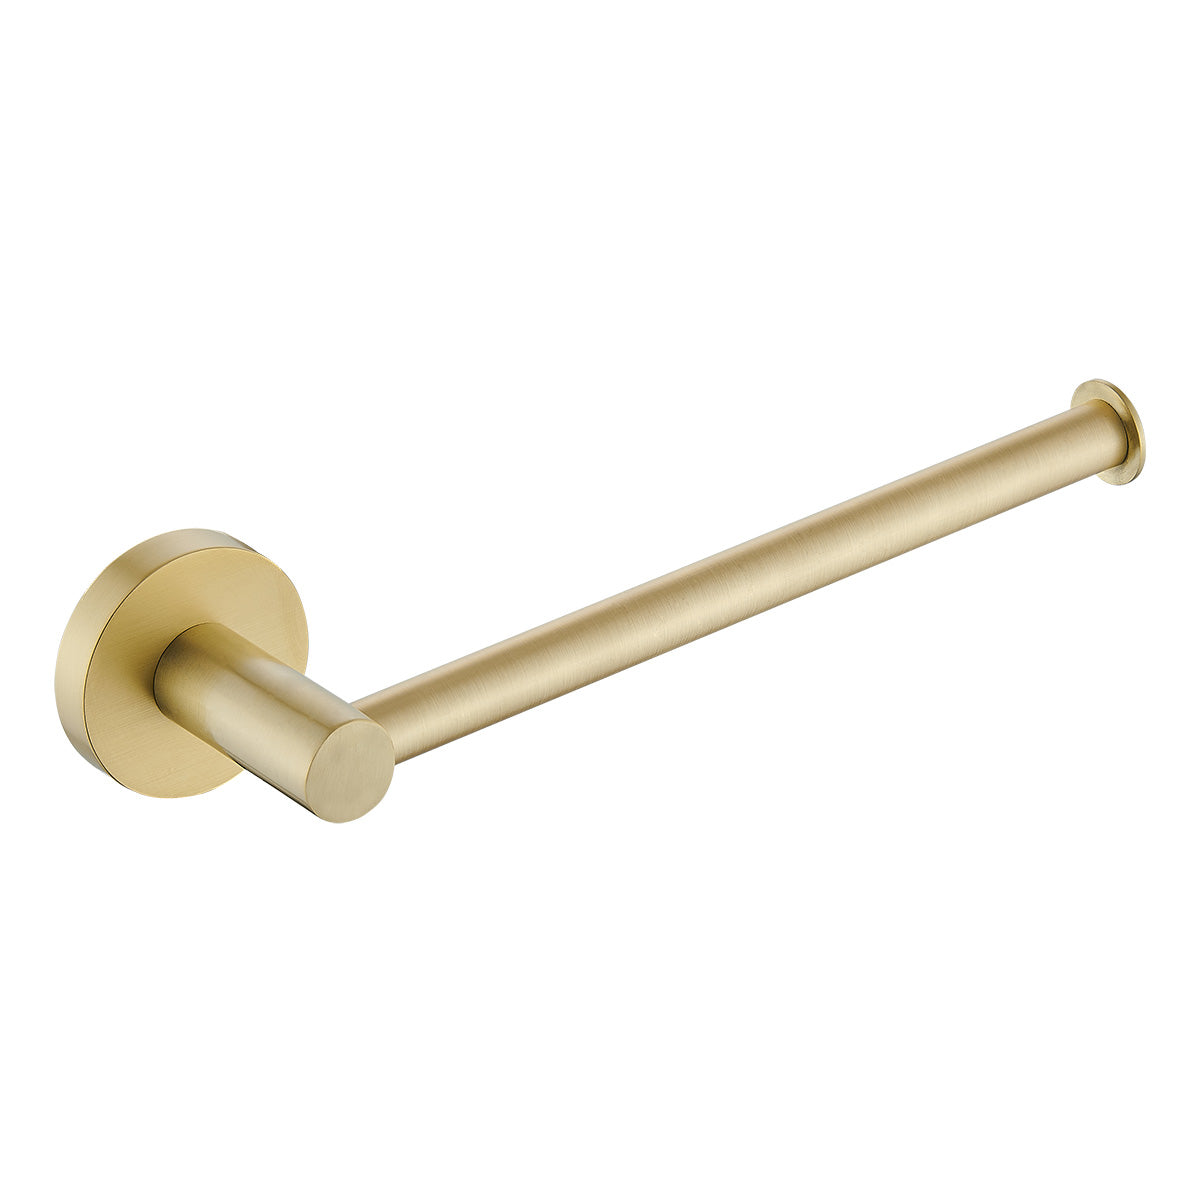 BA853 (BG) / Ideal Hand Towel Rail (Brushed Gold) - Hellycar Circular Design in Brushed Gold and Brass